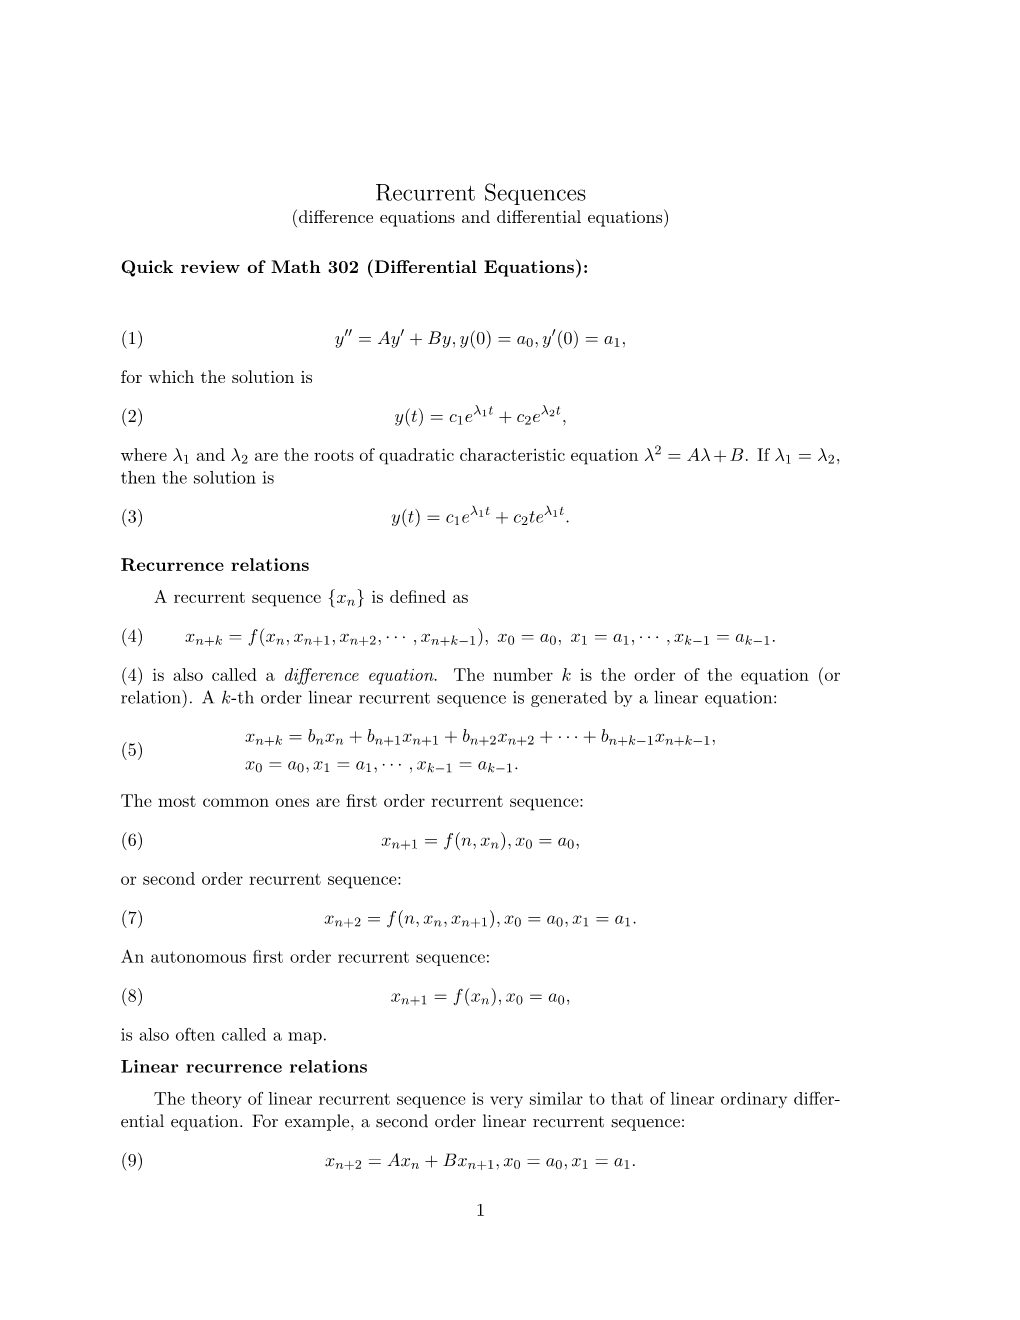 Recurrence Handout